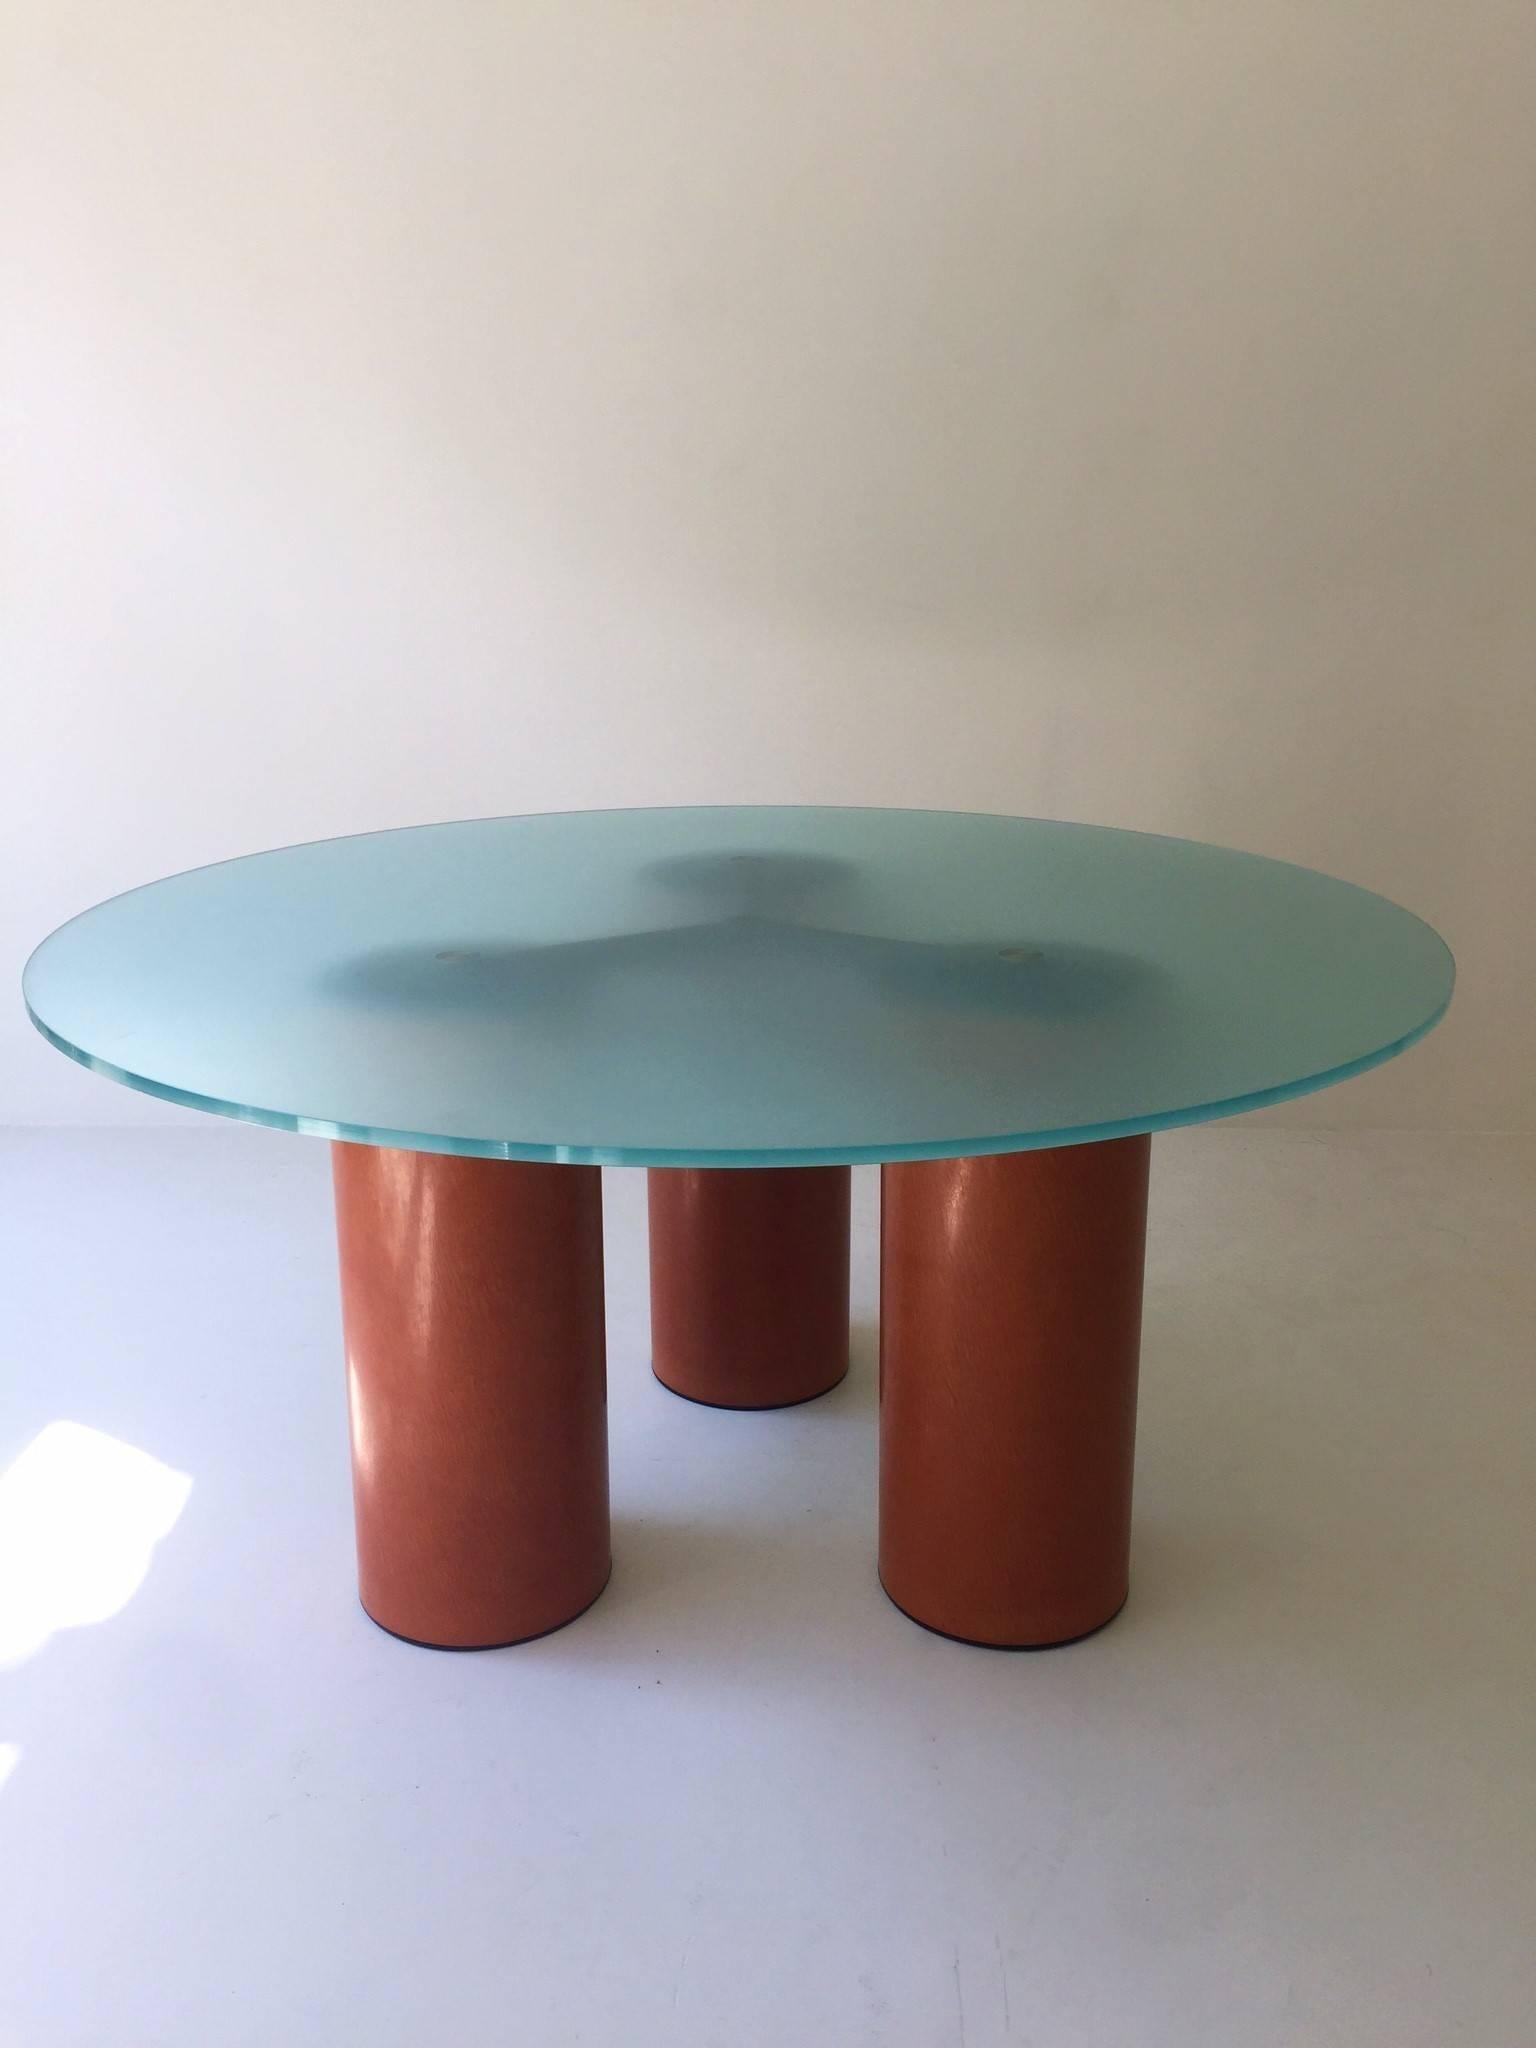 Very remarkable rare table designed for Acerbis. The table received numerous prices for its combination of traditional craftsmanship and elegant timeless approach in it's design.

This three legged version is out of production as also the